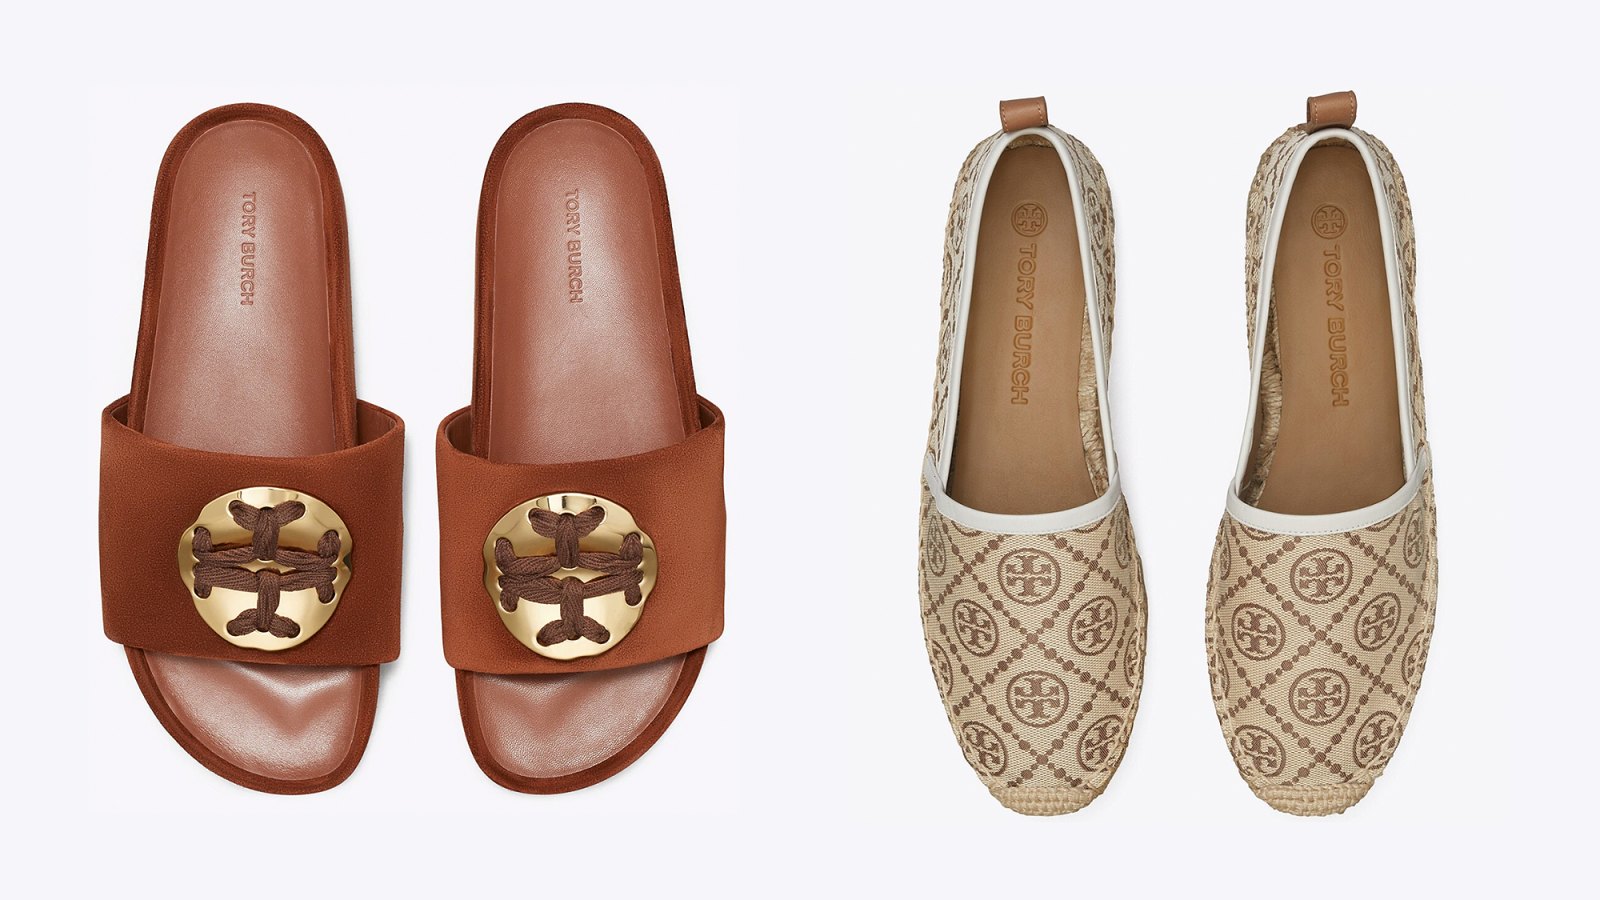 Tory Burch, Shoes, Brand New Tory Burch Shoes